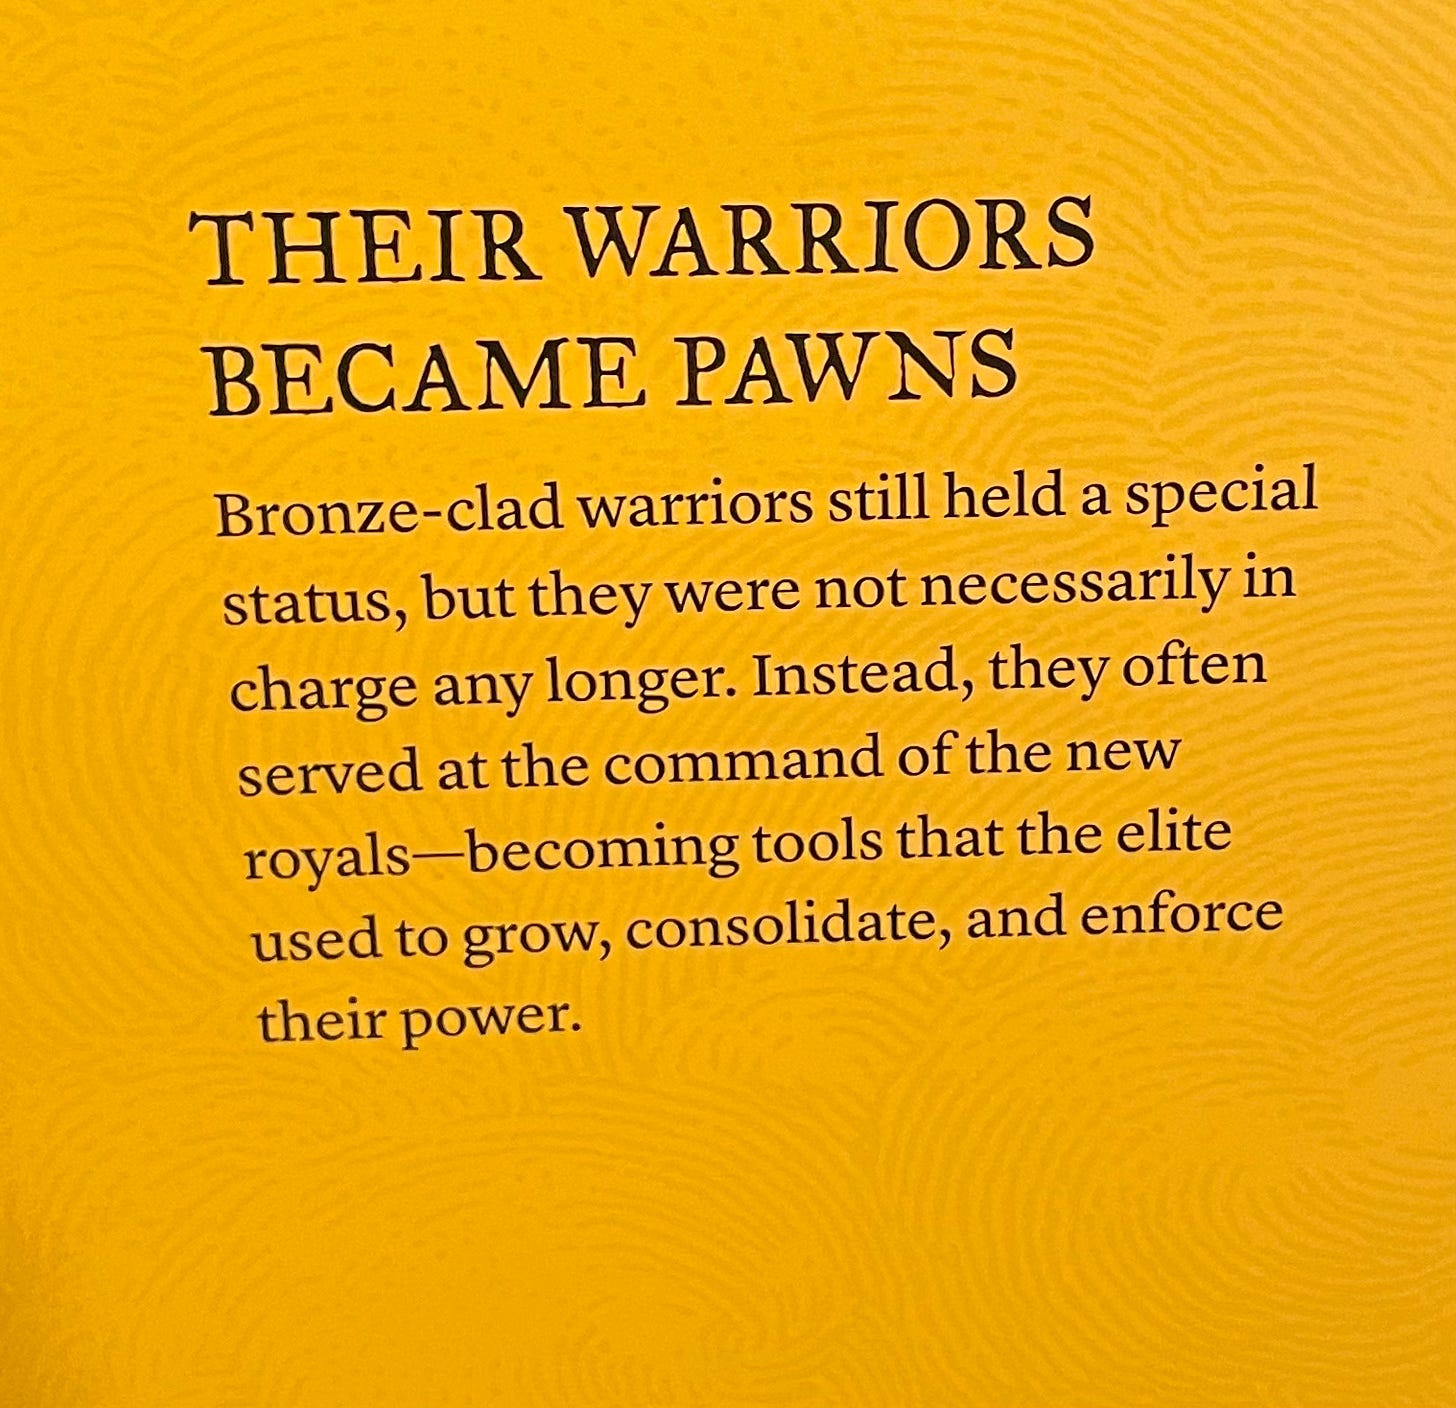 museum plaque text reading 'their warriors became pawns. Bronze-clad warriors still held a special status, but they were not necessarily in charge any longer. Instead, they often served at the command of the new royals—becoming tools that the elite used to grow, consolidate, and enforce their power.'